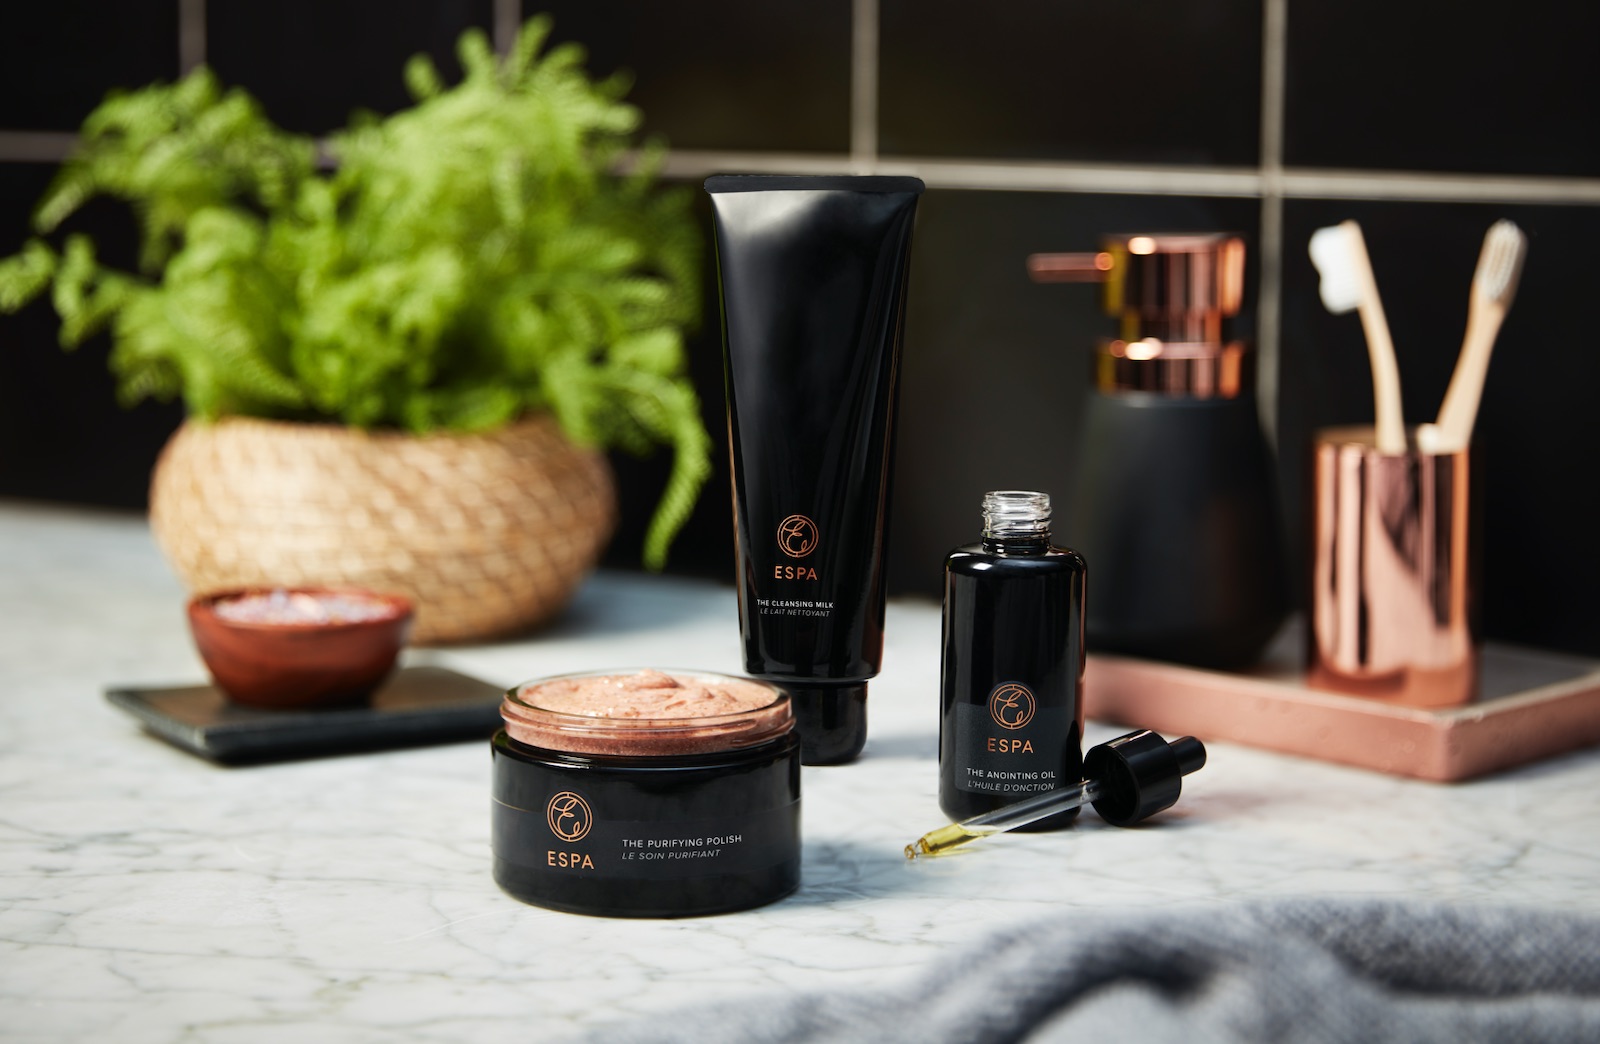 ESPA introduces skin care line inspired by ancient healing methods	
